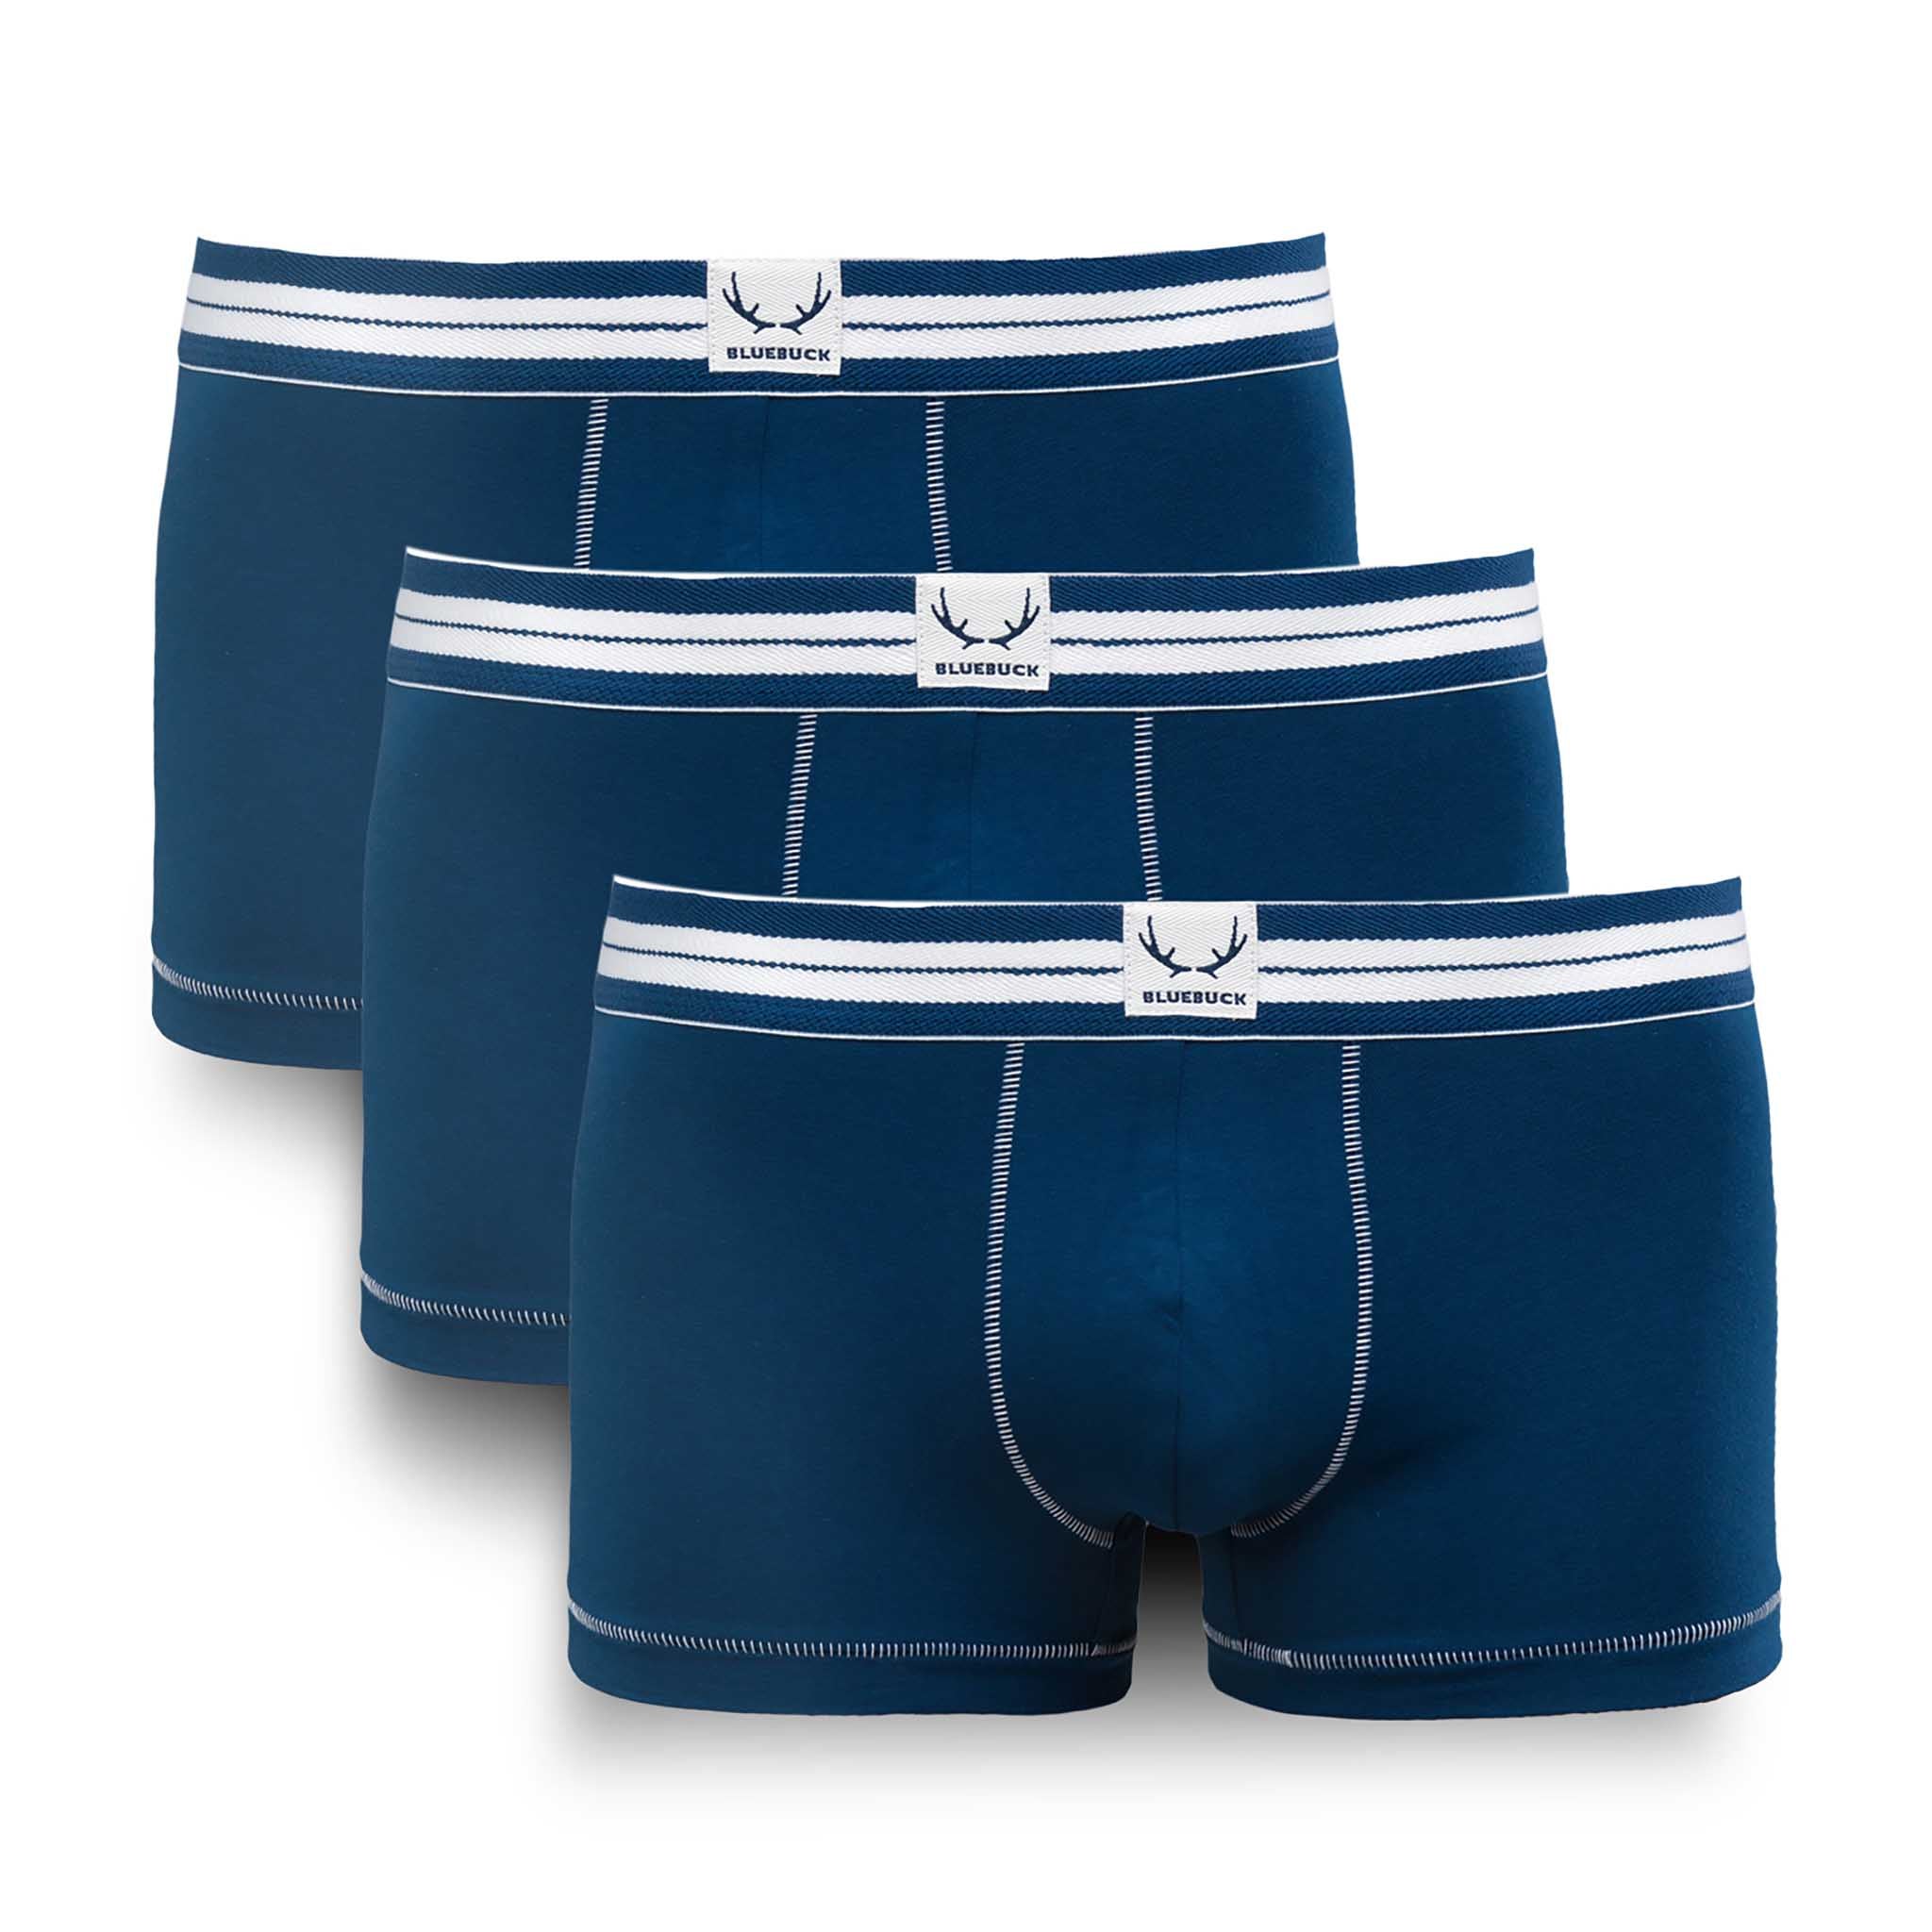 Dark blue boxer shorts 3-pack made of organic cotton from Bluebuck